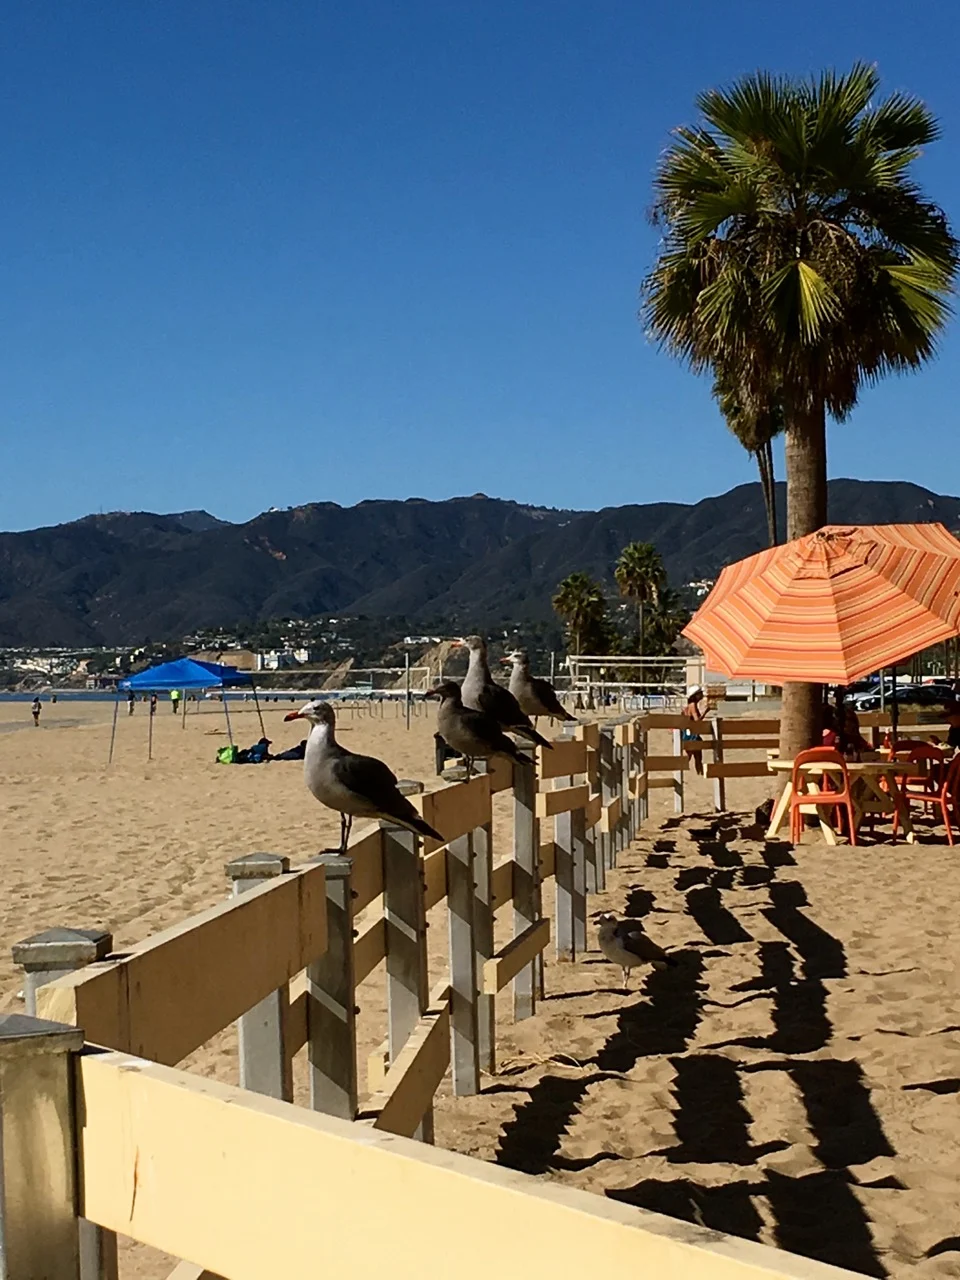 There are so many beautiful beach in Los Angeles including this one in front of Back on the Beach in Santa Monica